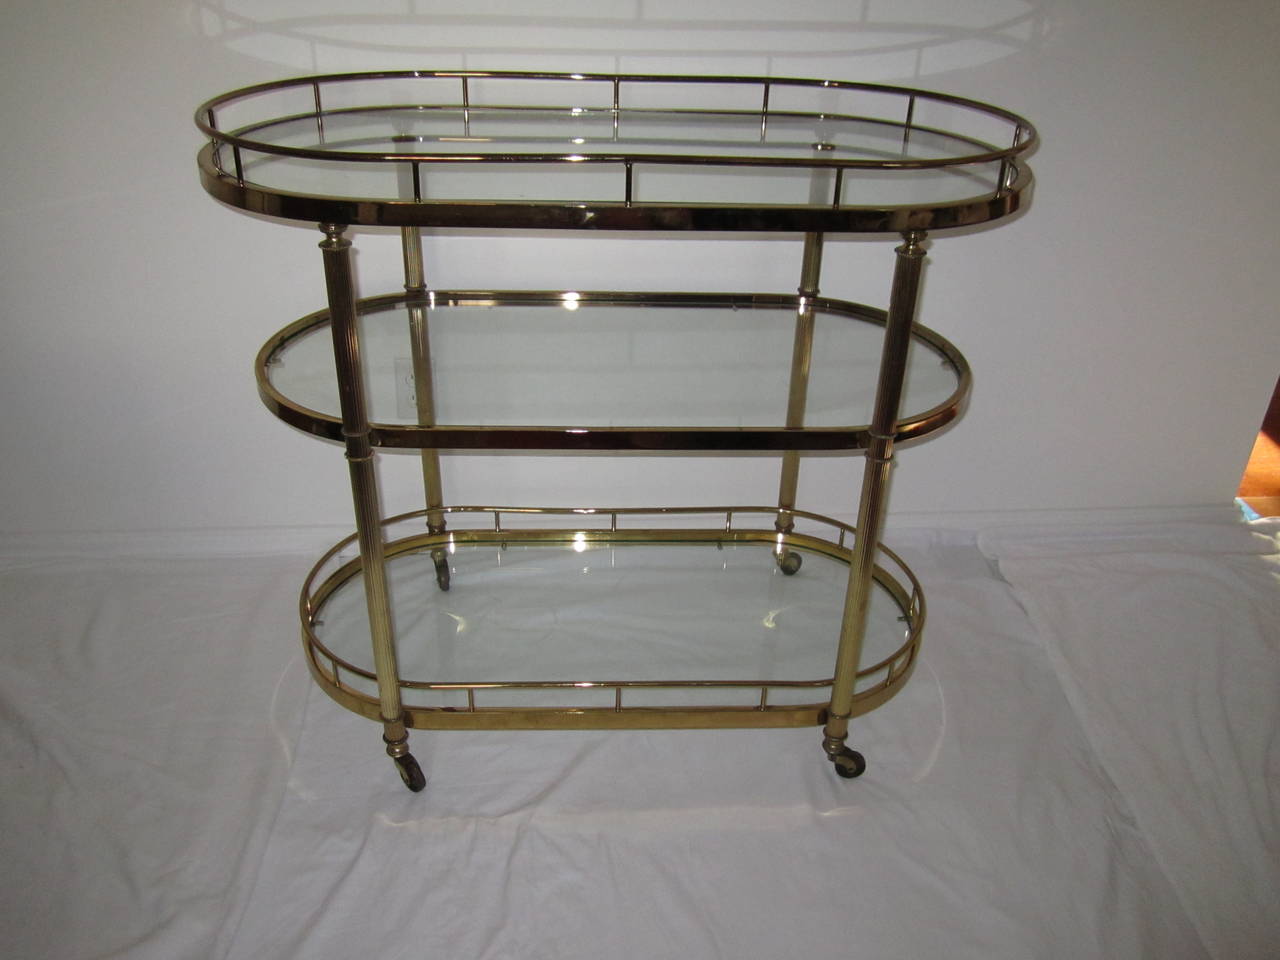 Vintage oval brass bar cart designed for the Design Institute of America (D.I.A.).

Solidly built vintage polished brass and glass bar cart designed for DIA, Design Institute of America. Set on rolling casters with three oval